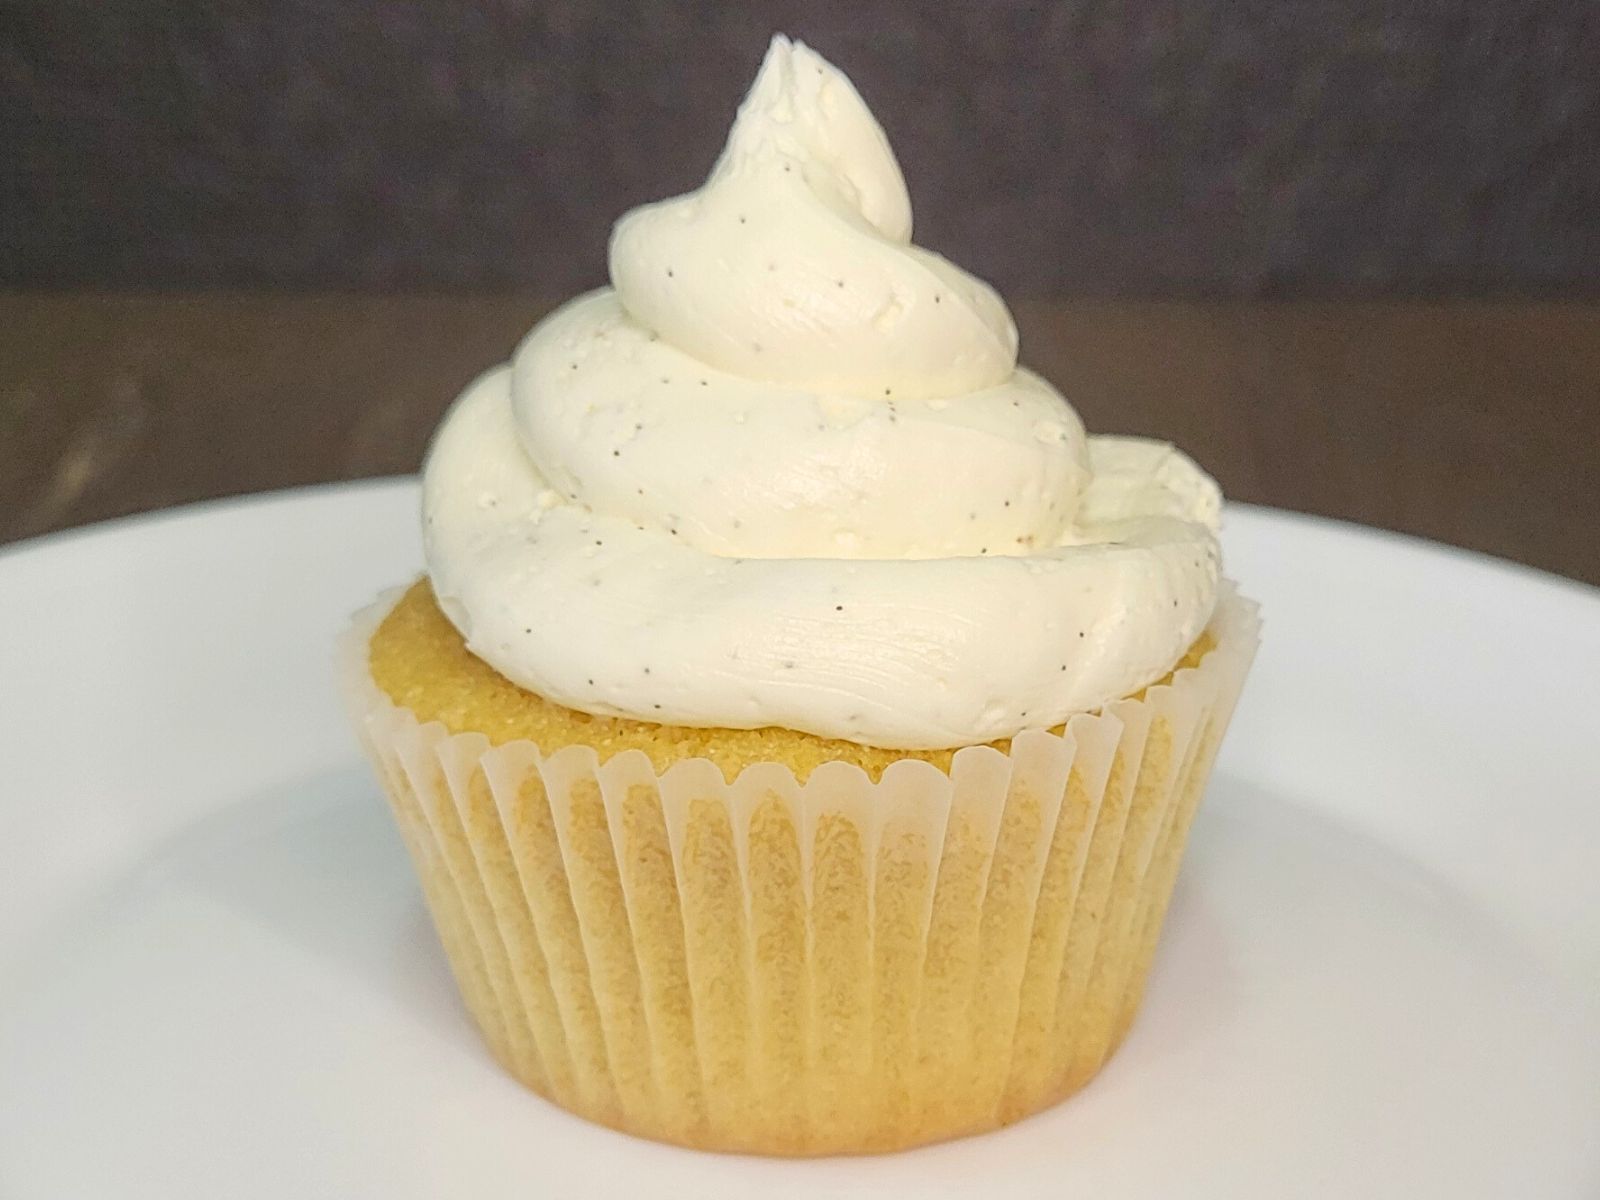 a vanilla cupcake made with fresh milled flour and topped with vanilla bean frosting